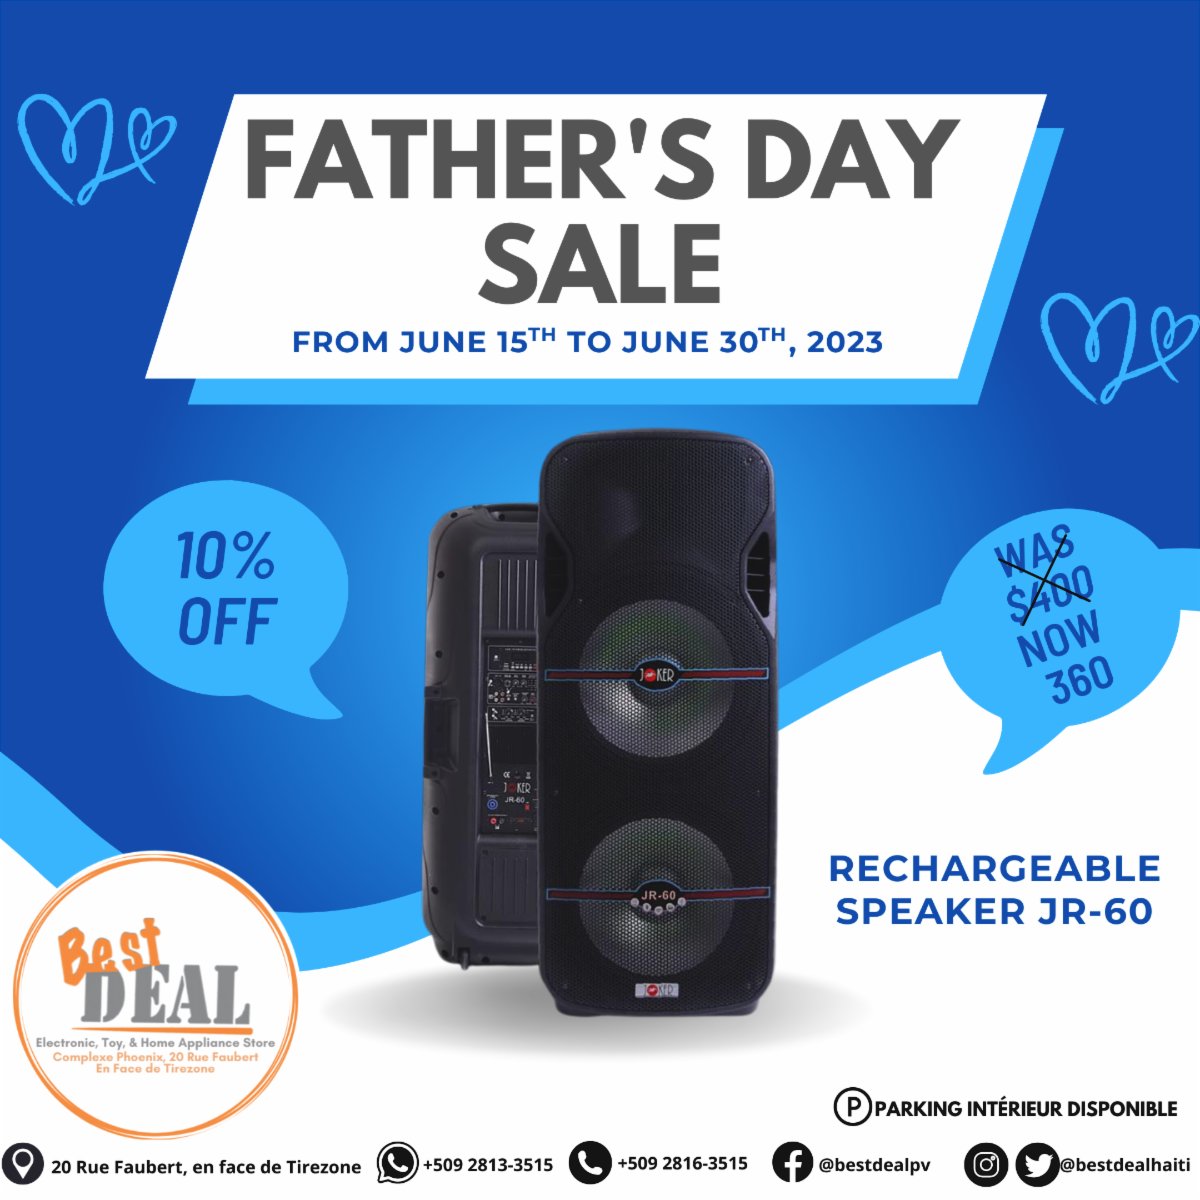 What Dad Wants, Dad Gets💙

#FatherGiftIdeas #DadDay #fetedesperes #papa #bonnefetepapa #fetedespapas #homme #cadeau #cadeaupapa #cadeaufetedesperes #ideecadeau #speaker #rechargeablespeaker #rechargeable #Joker #sale #piyay #special